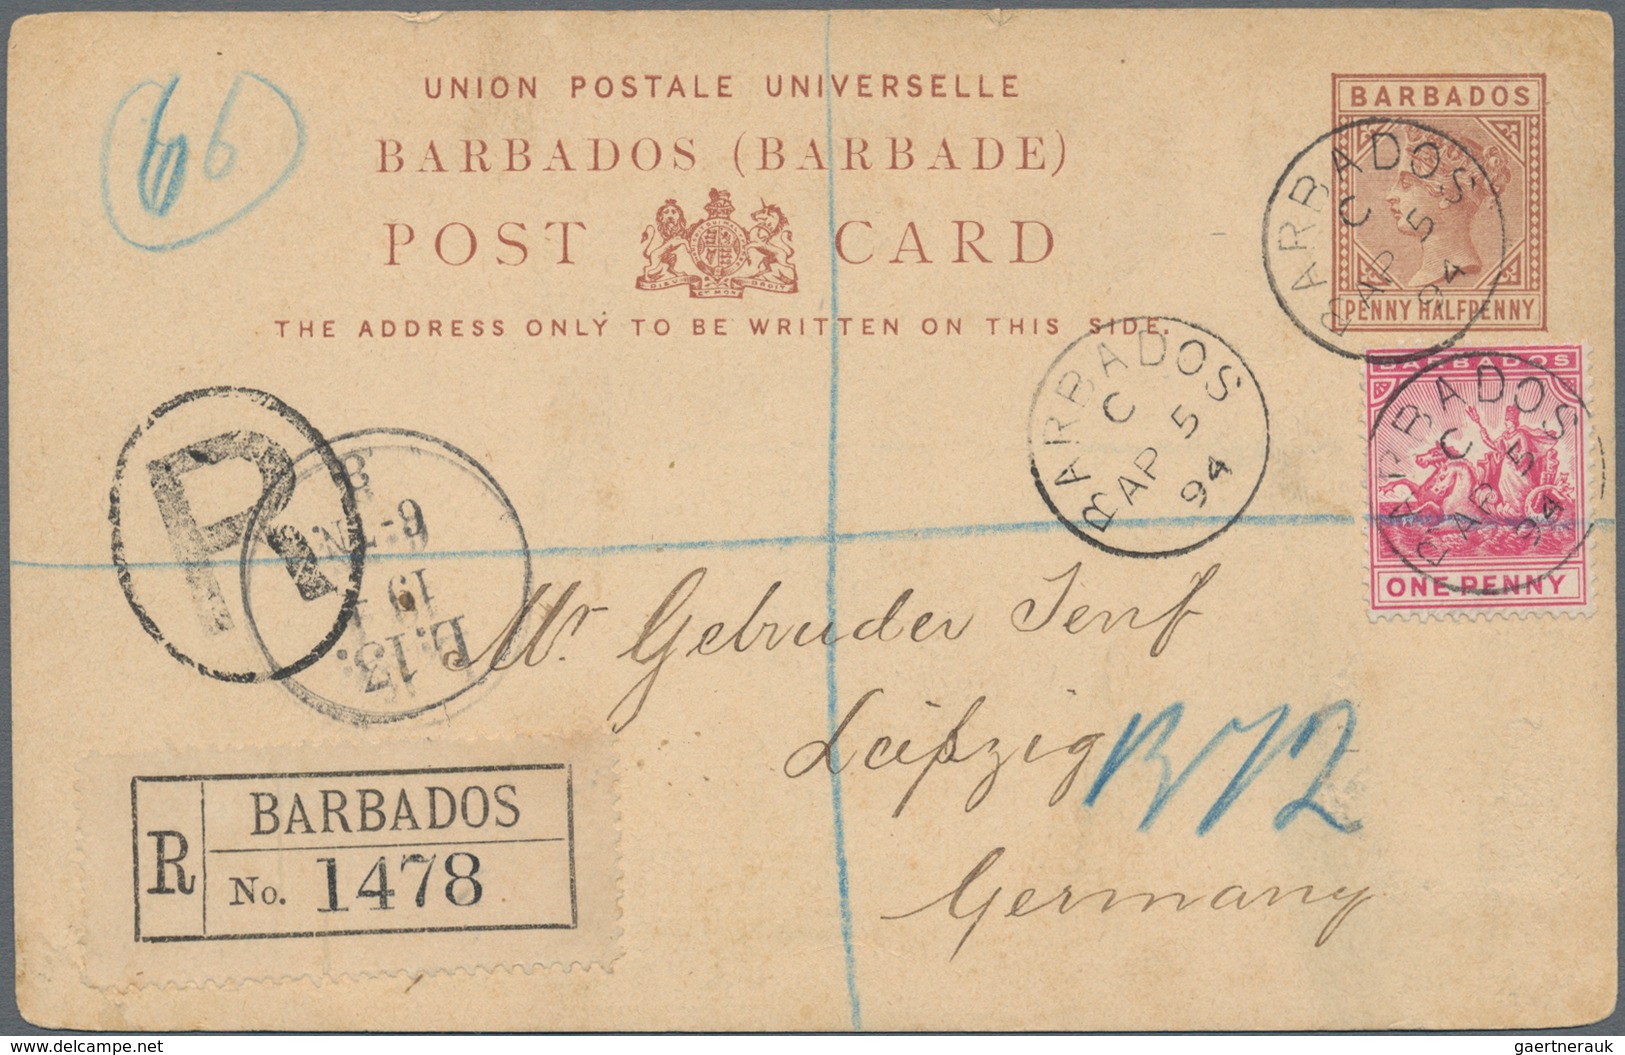 Barbados: 1894, Card QV 1 1/2d Uprated 1d Canc. "BARBADOS AP 5 94" Registered To Leipzig/Germany W. - Barbados (1966-...)